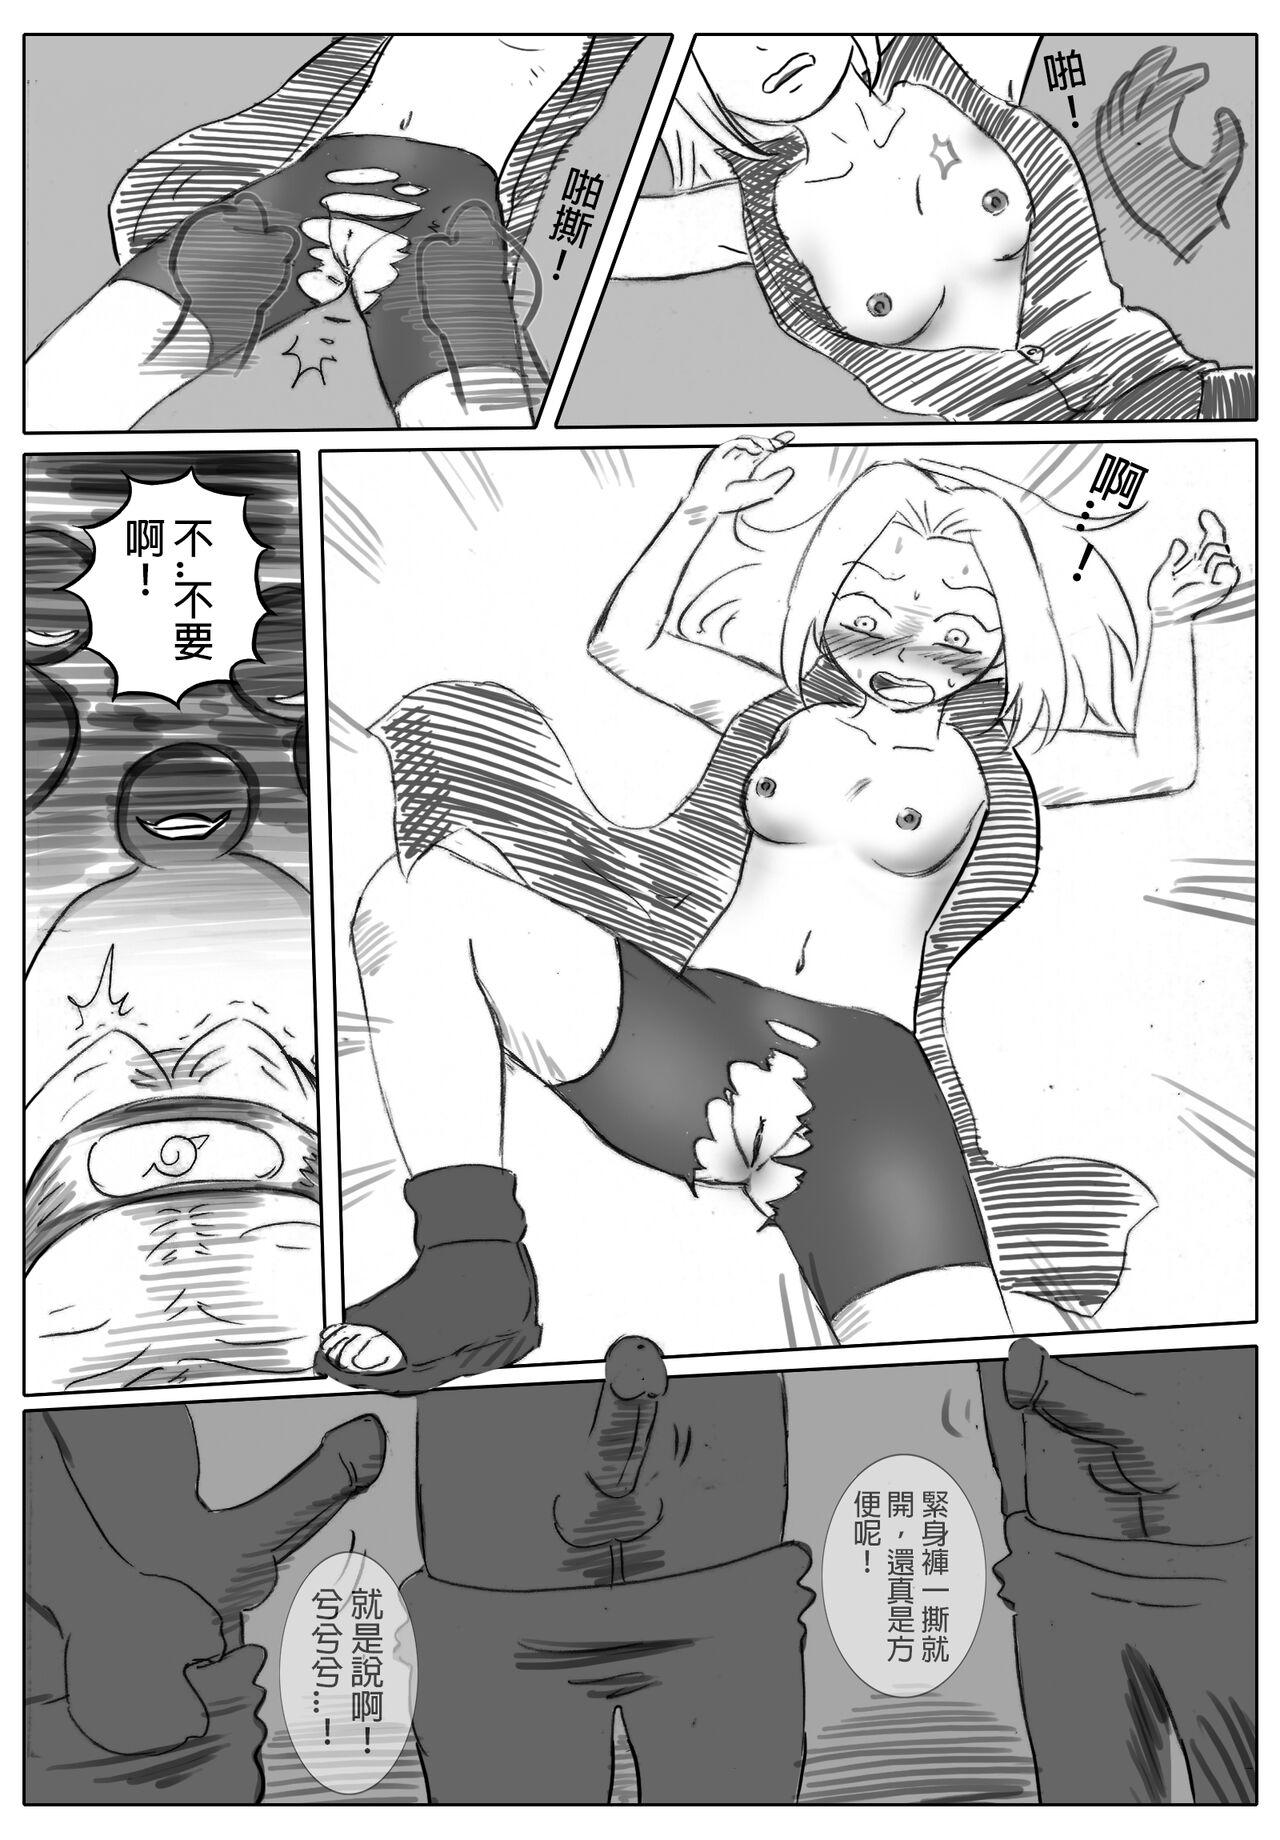 Off 琄偿腻 い 刚诀 - Naruto Butts - Page 3